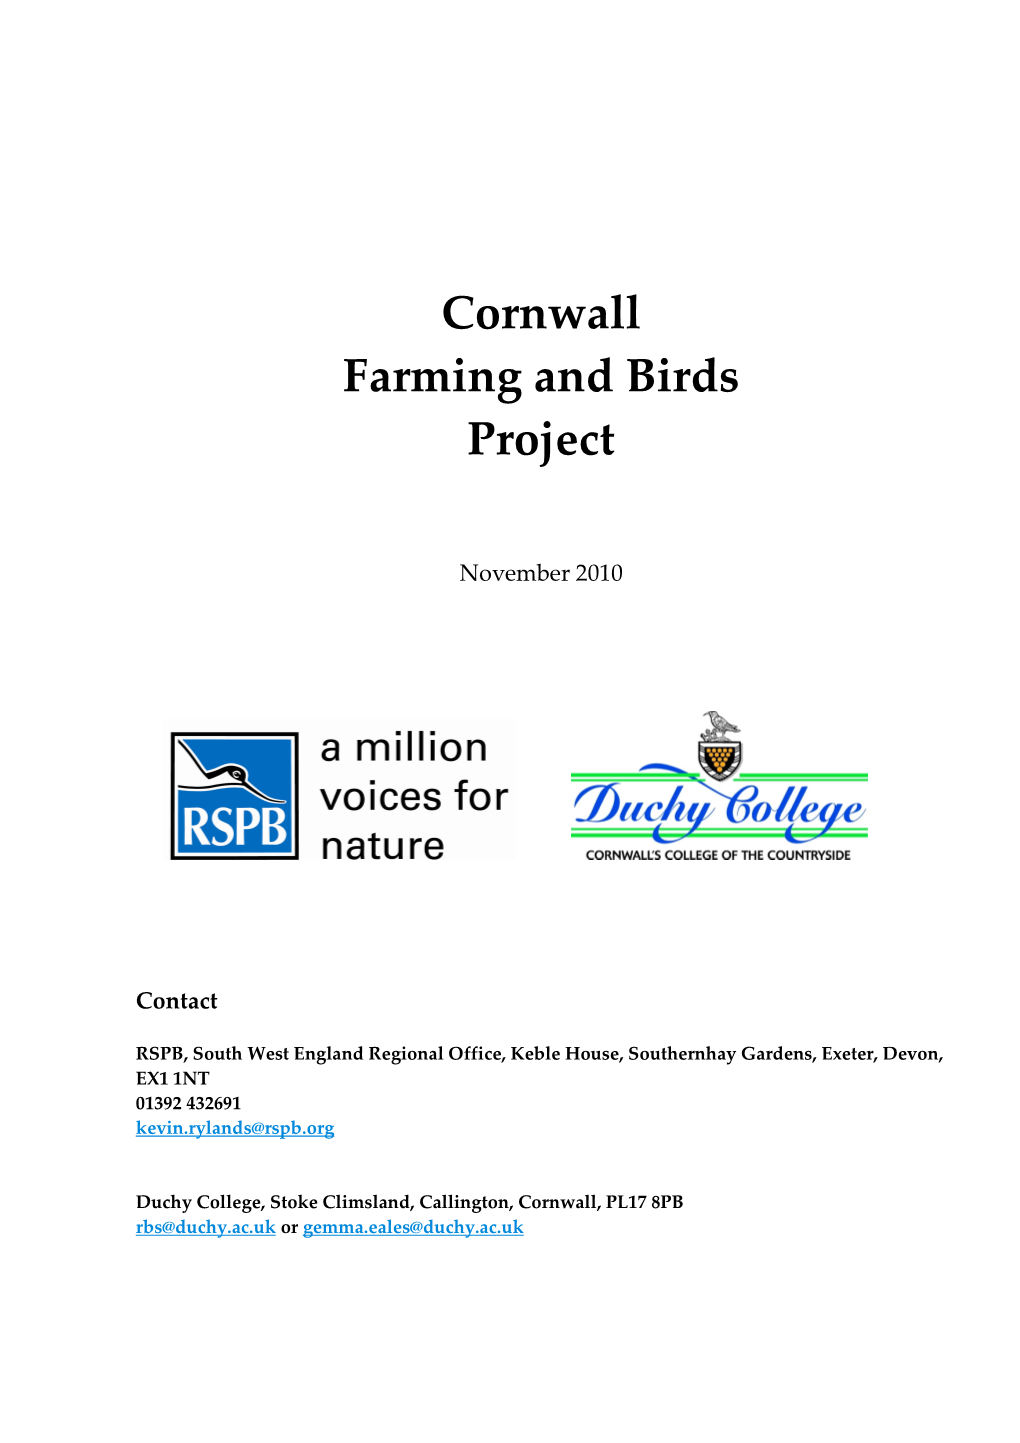 Cornwall Farming and Birds Project